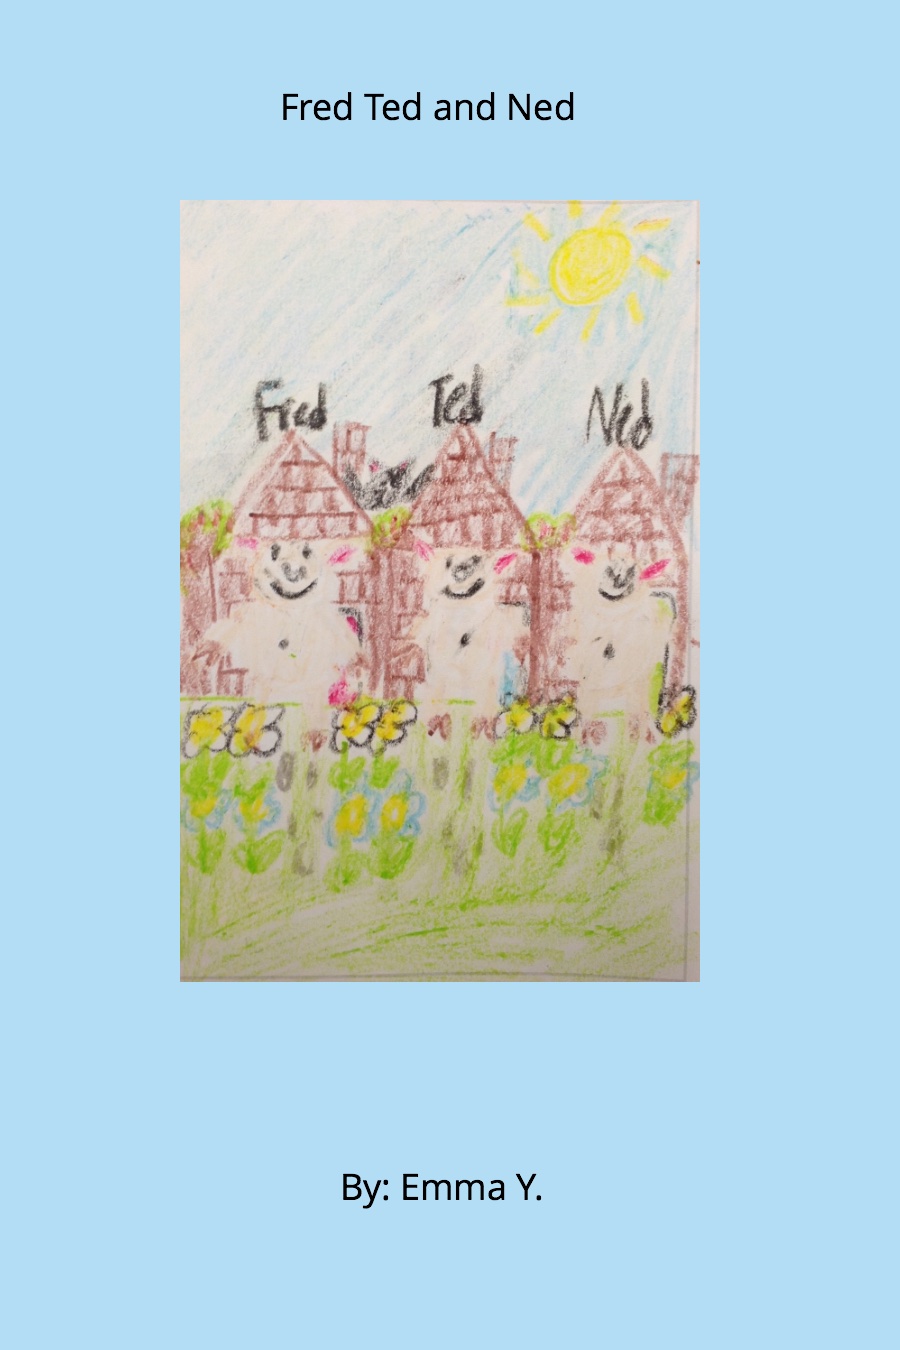 Fred, Ted, and Ned by Emma Y